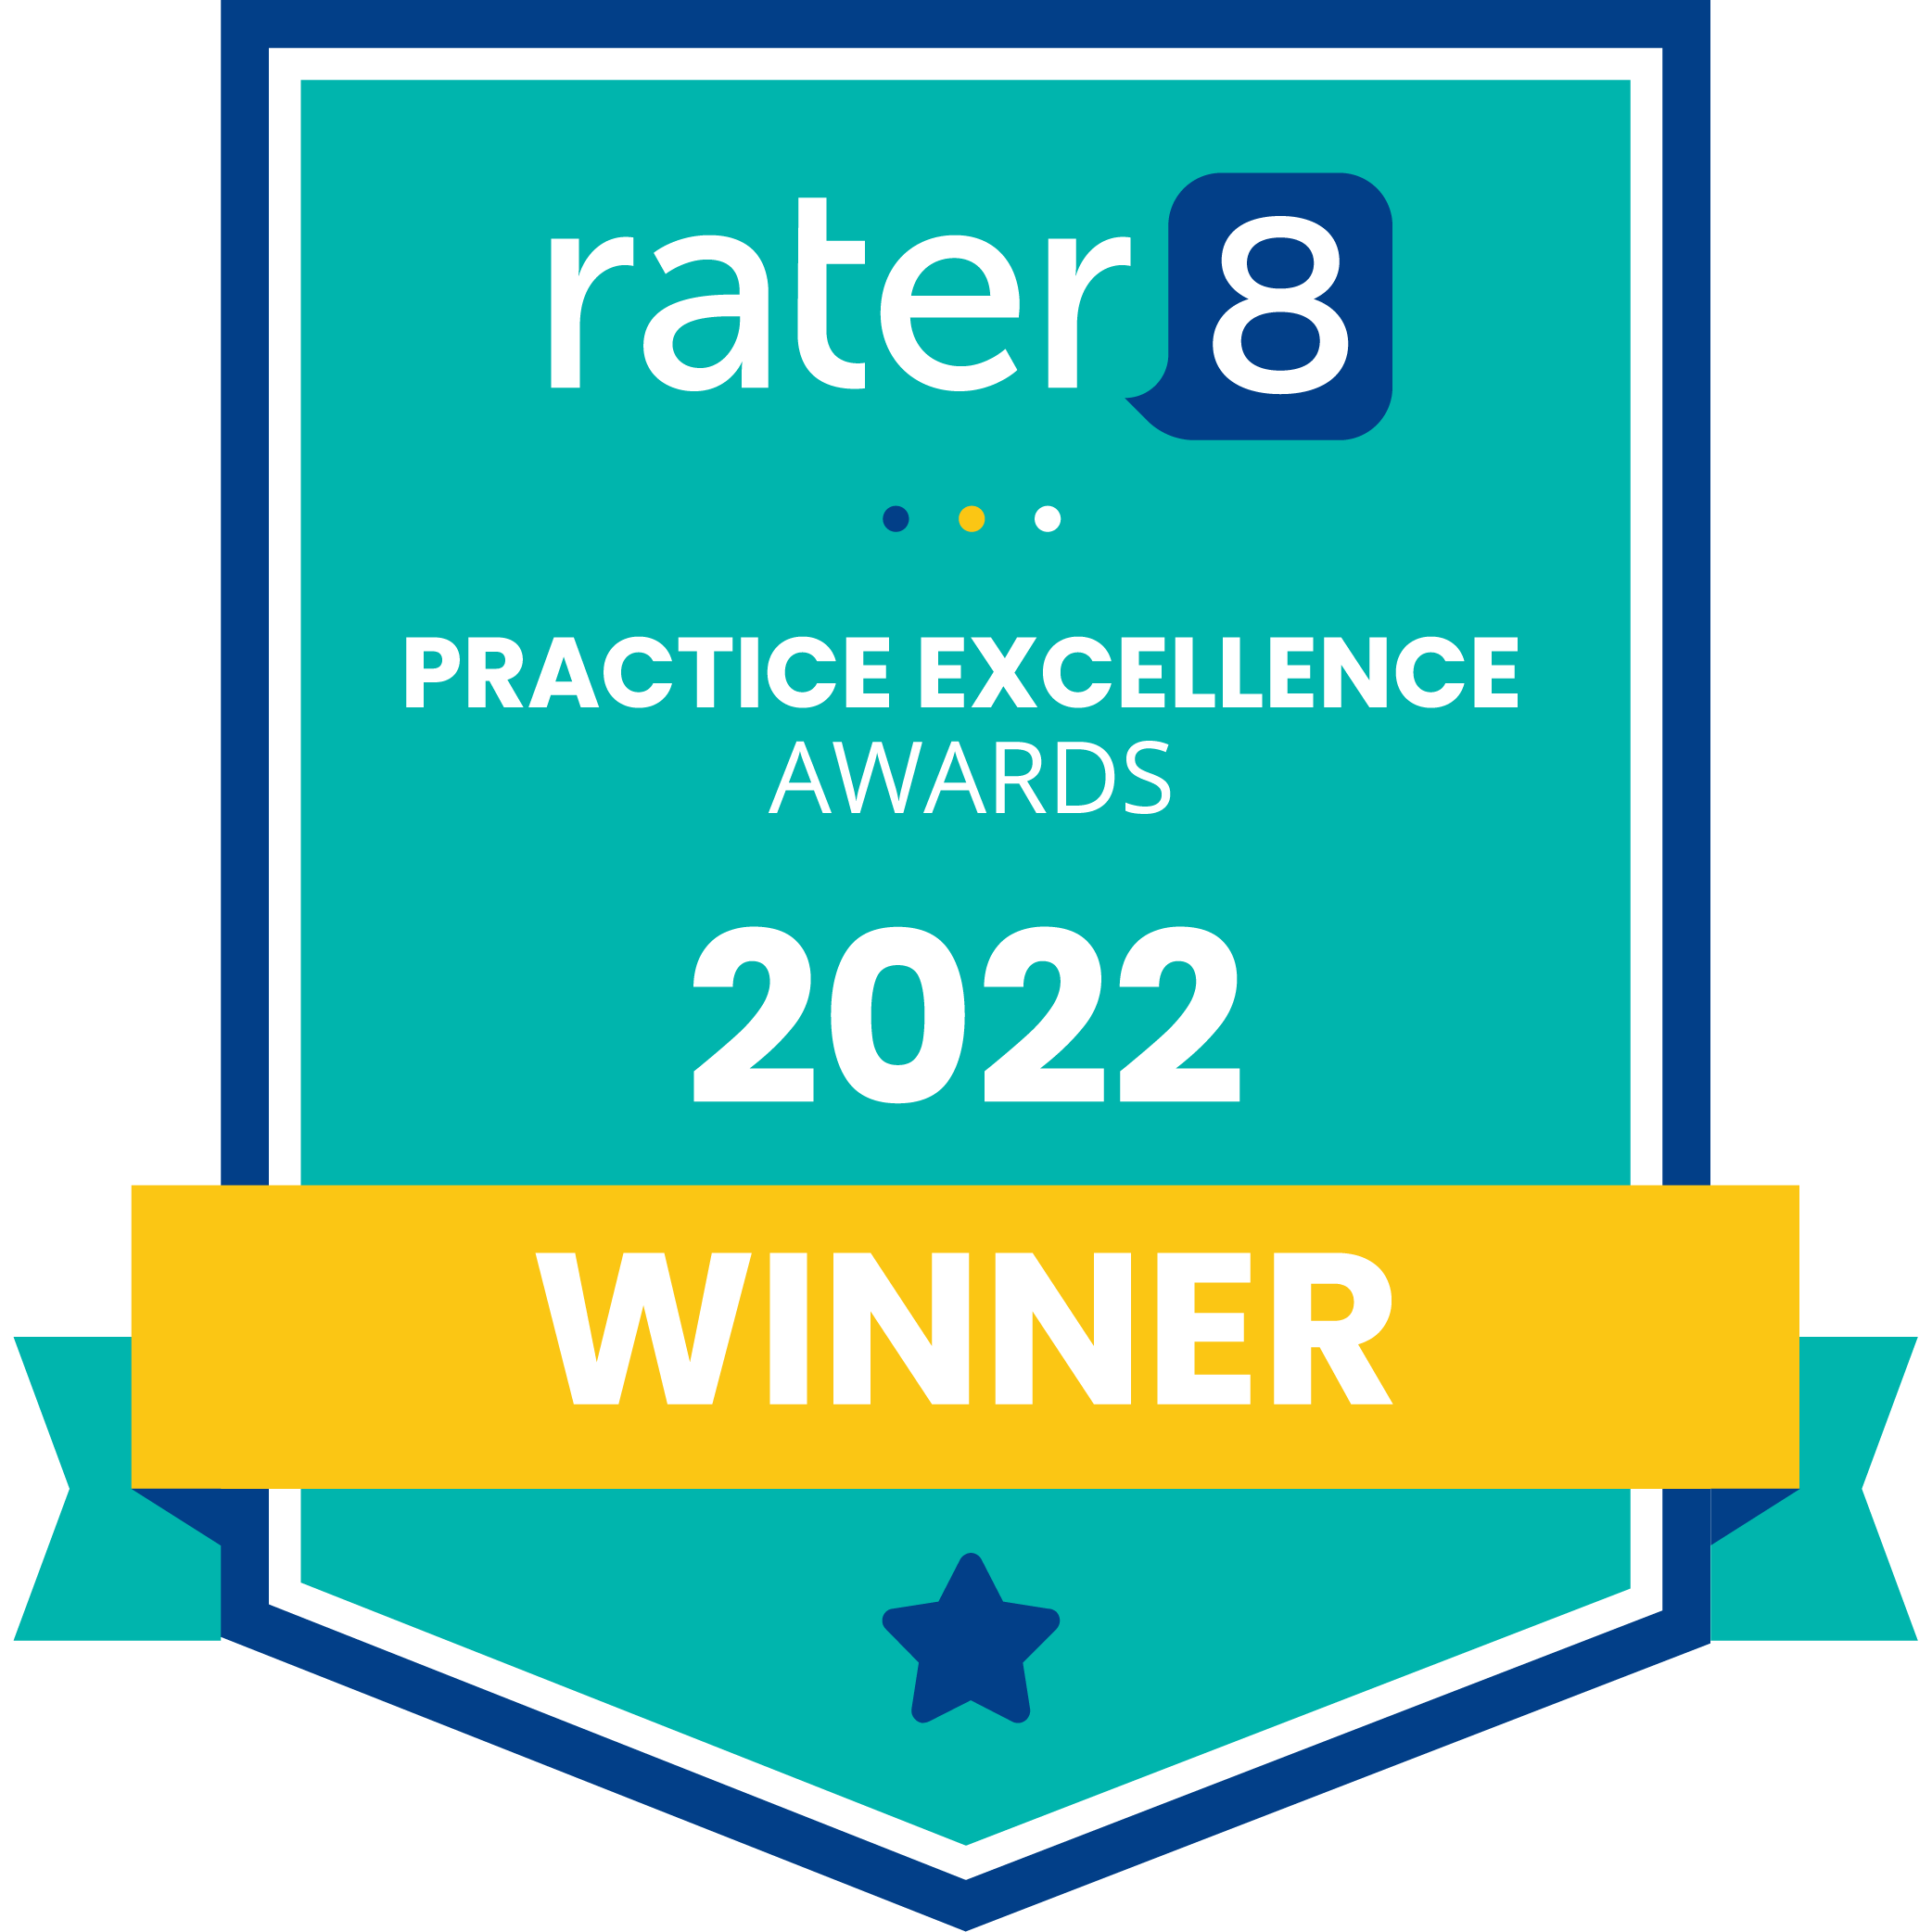 rater8 Practice Excellence Awards 2022 - Teal.png (99 KB)